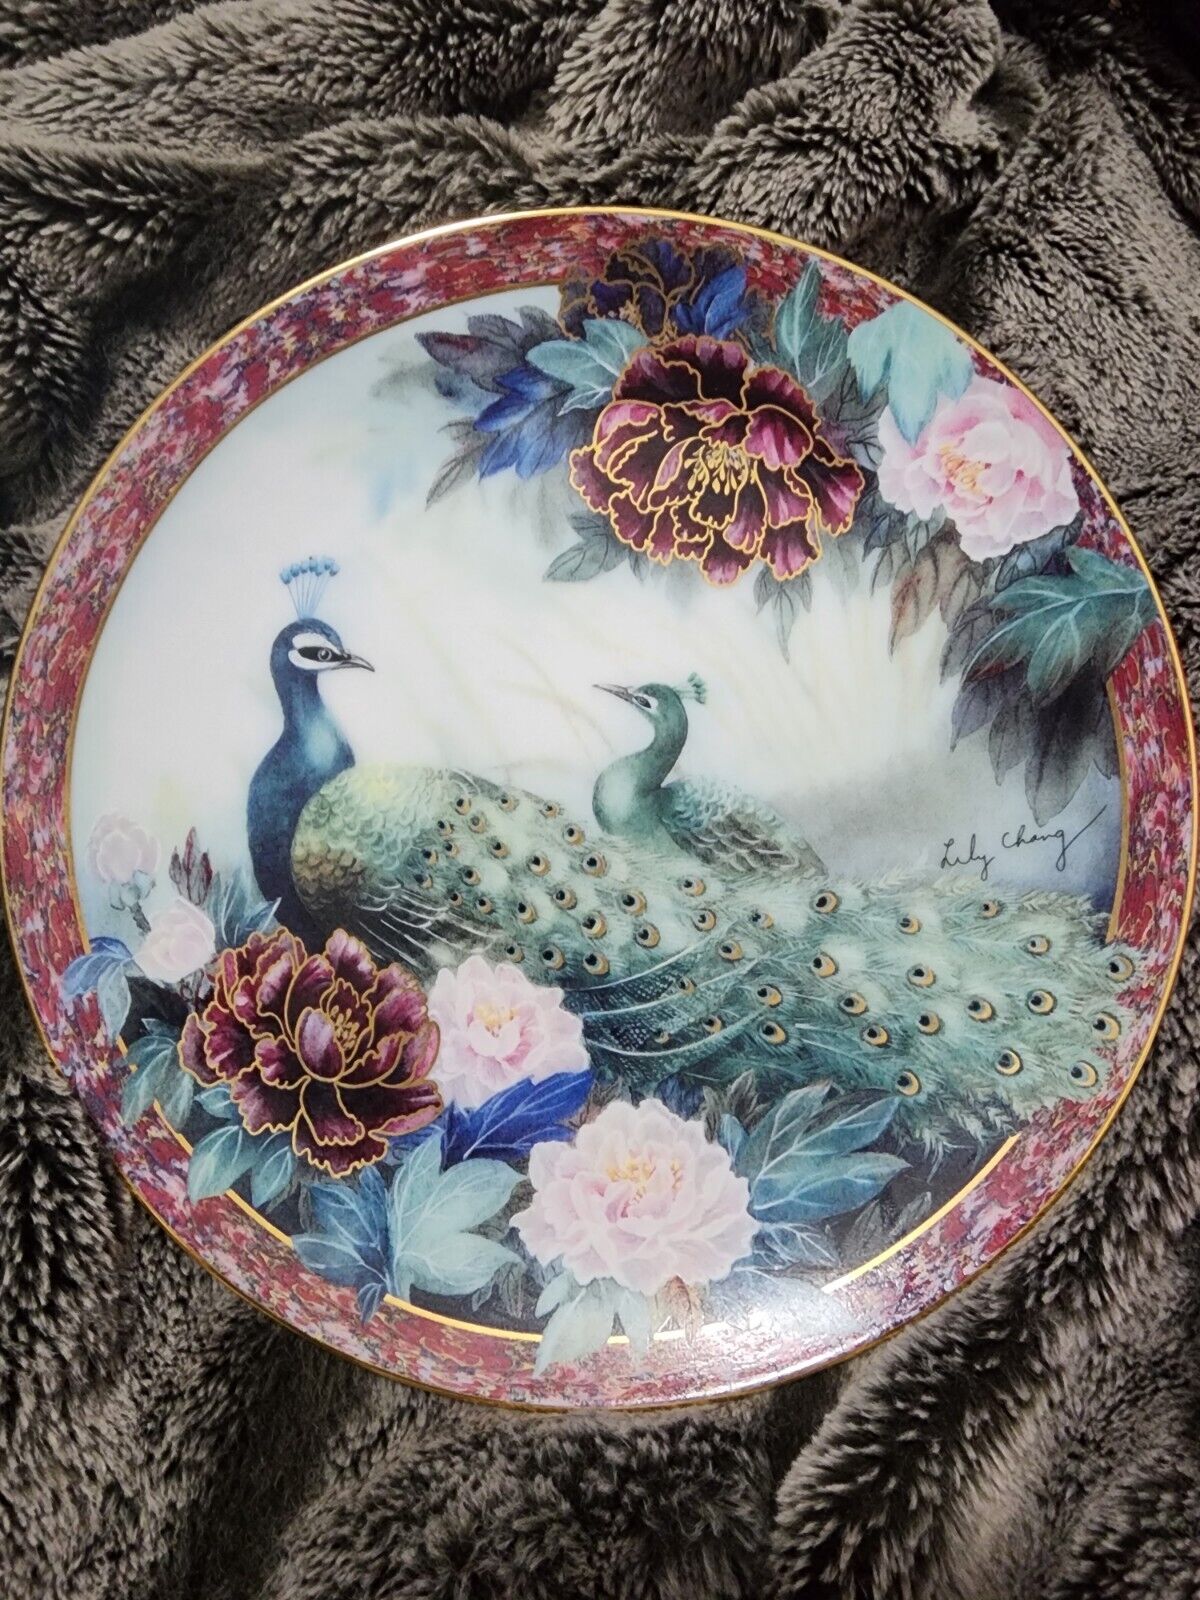 TRANQUILITY THE GARDENS OF PARADISE PEACOCK COLLECTORS PLATE